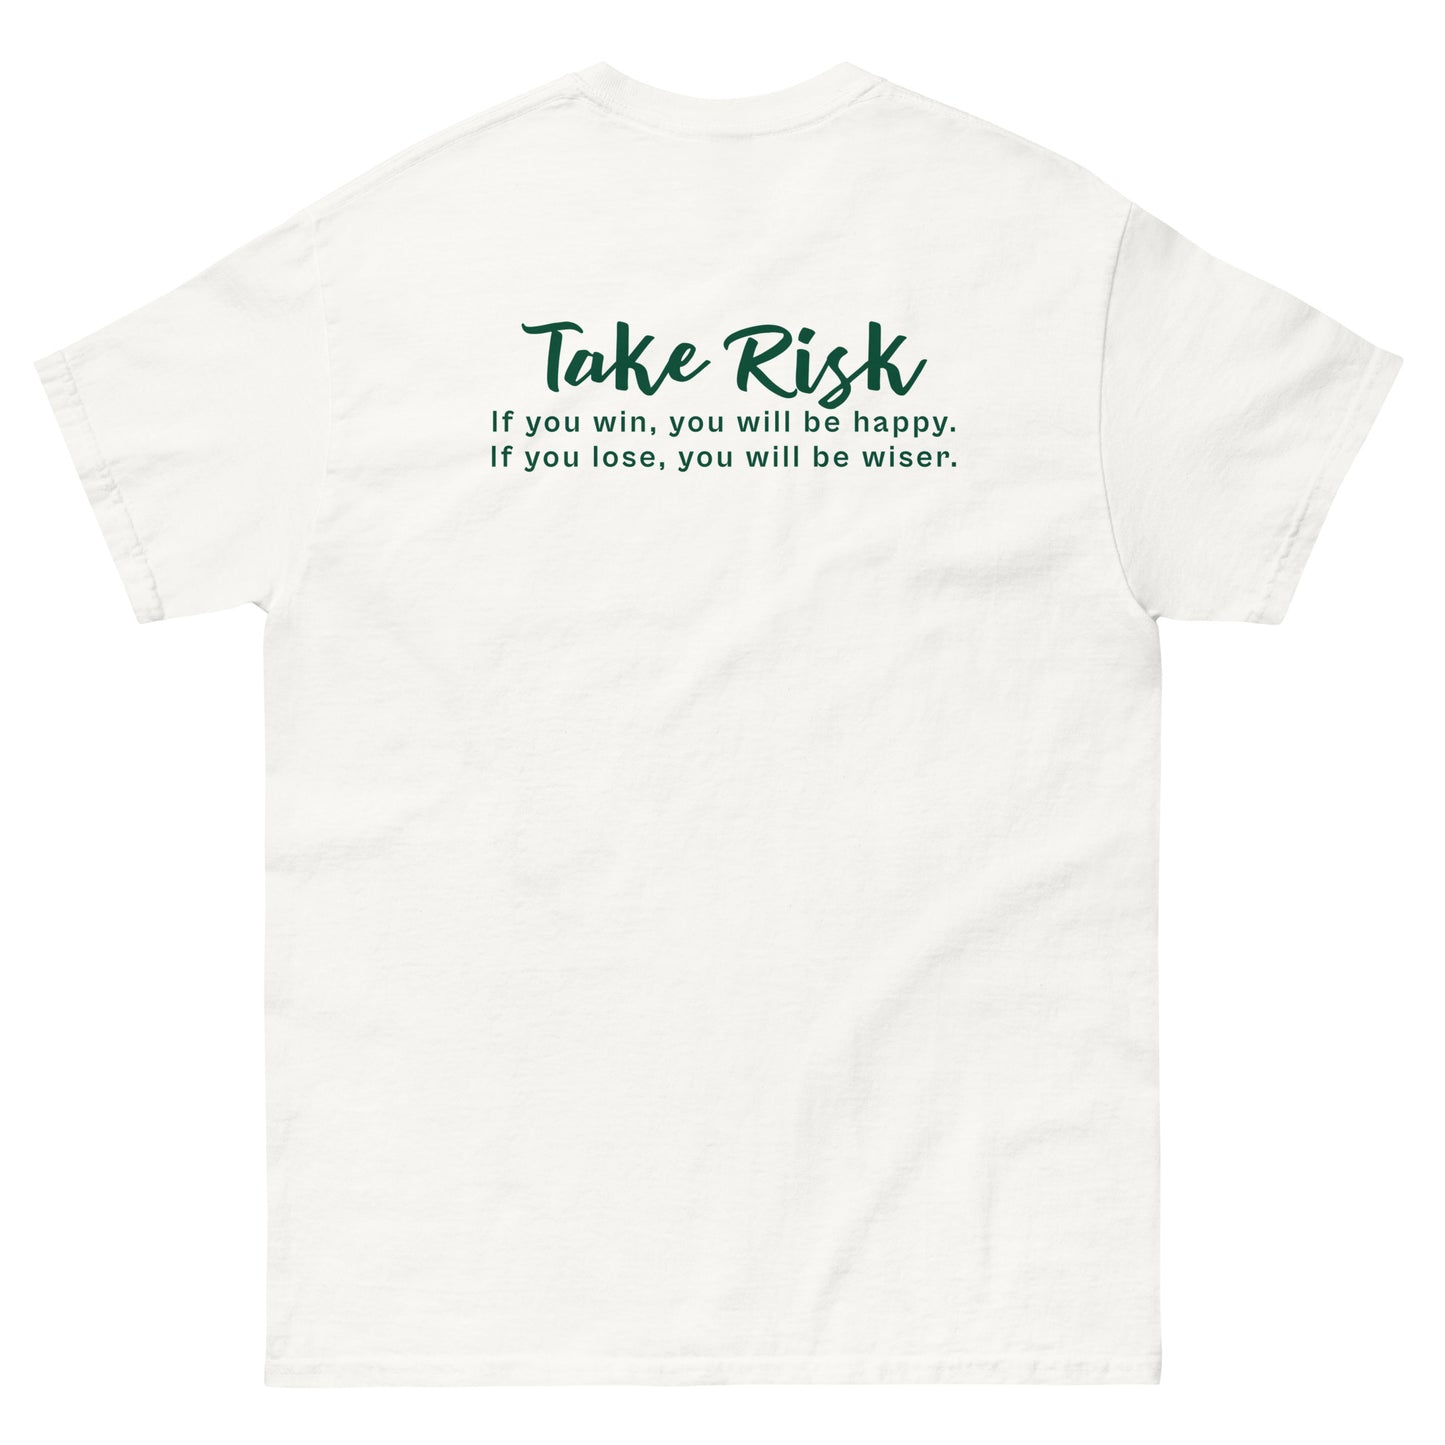 White High Quality Tee - Front Design with "Take Risk, if you win you will be happy, if you lose you will be wiser." print and an UFO print on left chest - Back Design with a Phrase "Take Risk, if you win you will be happy, if you lose you will be wiser." print